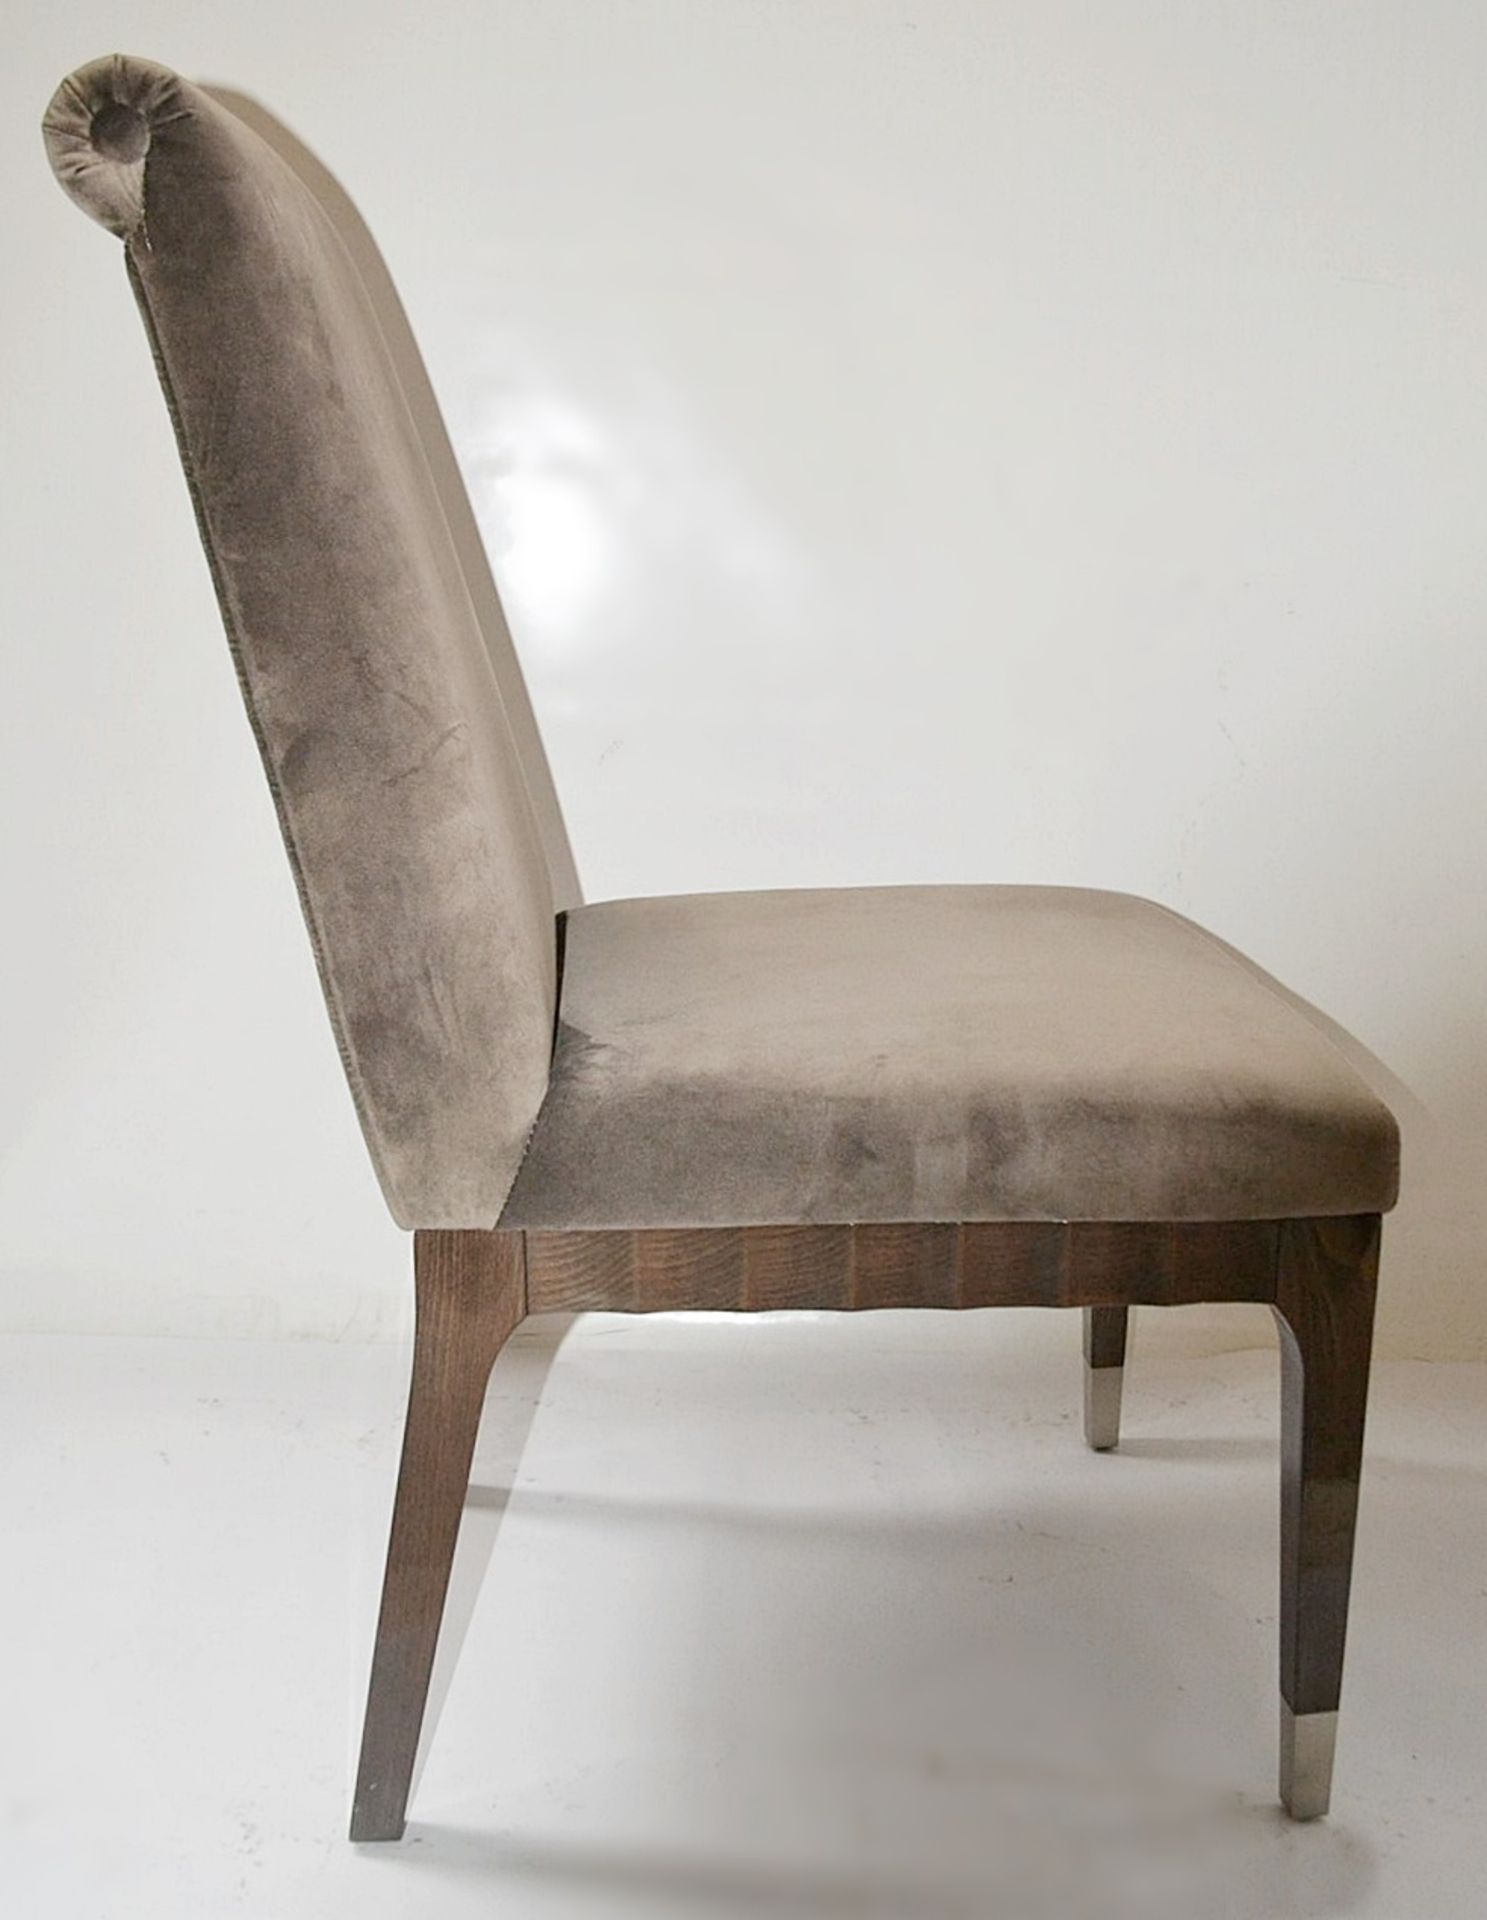 6 x GIORGIO COLLECTION 'Absolute' Italian Designer Dining Chairs - Pre-owned In Good Overall - Image 5 of 16